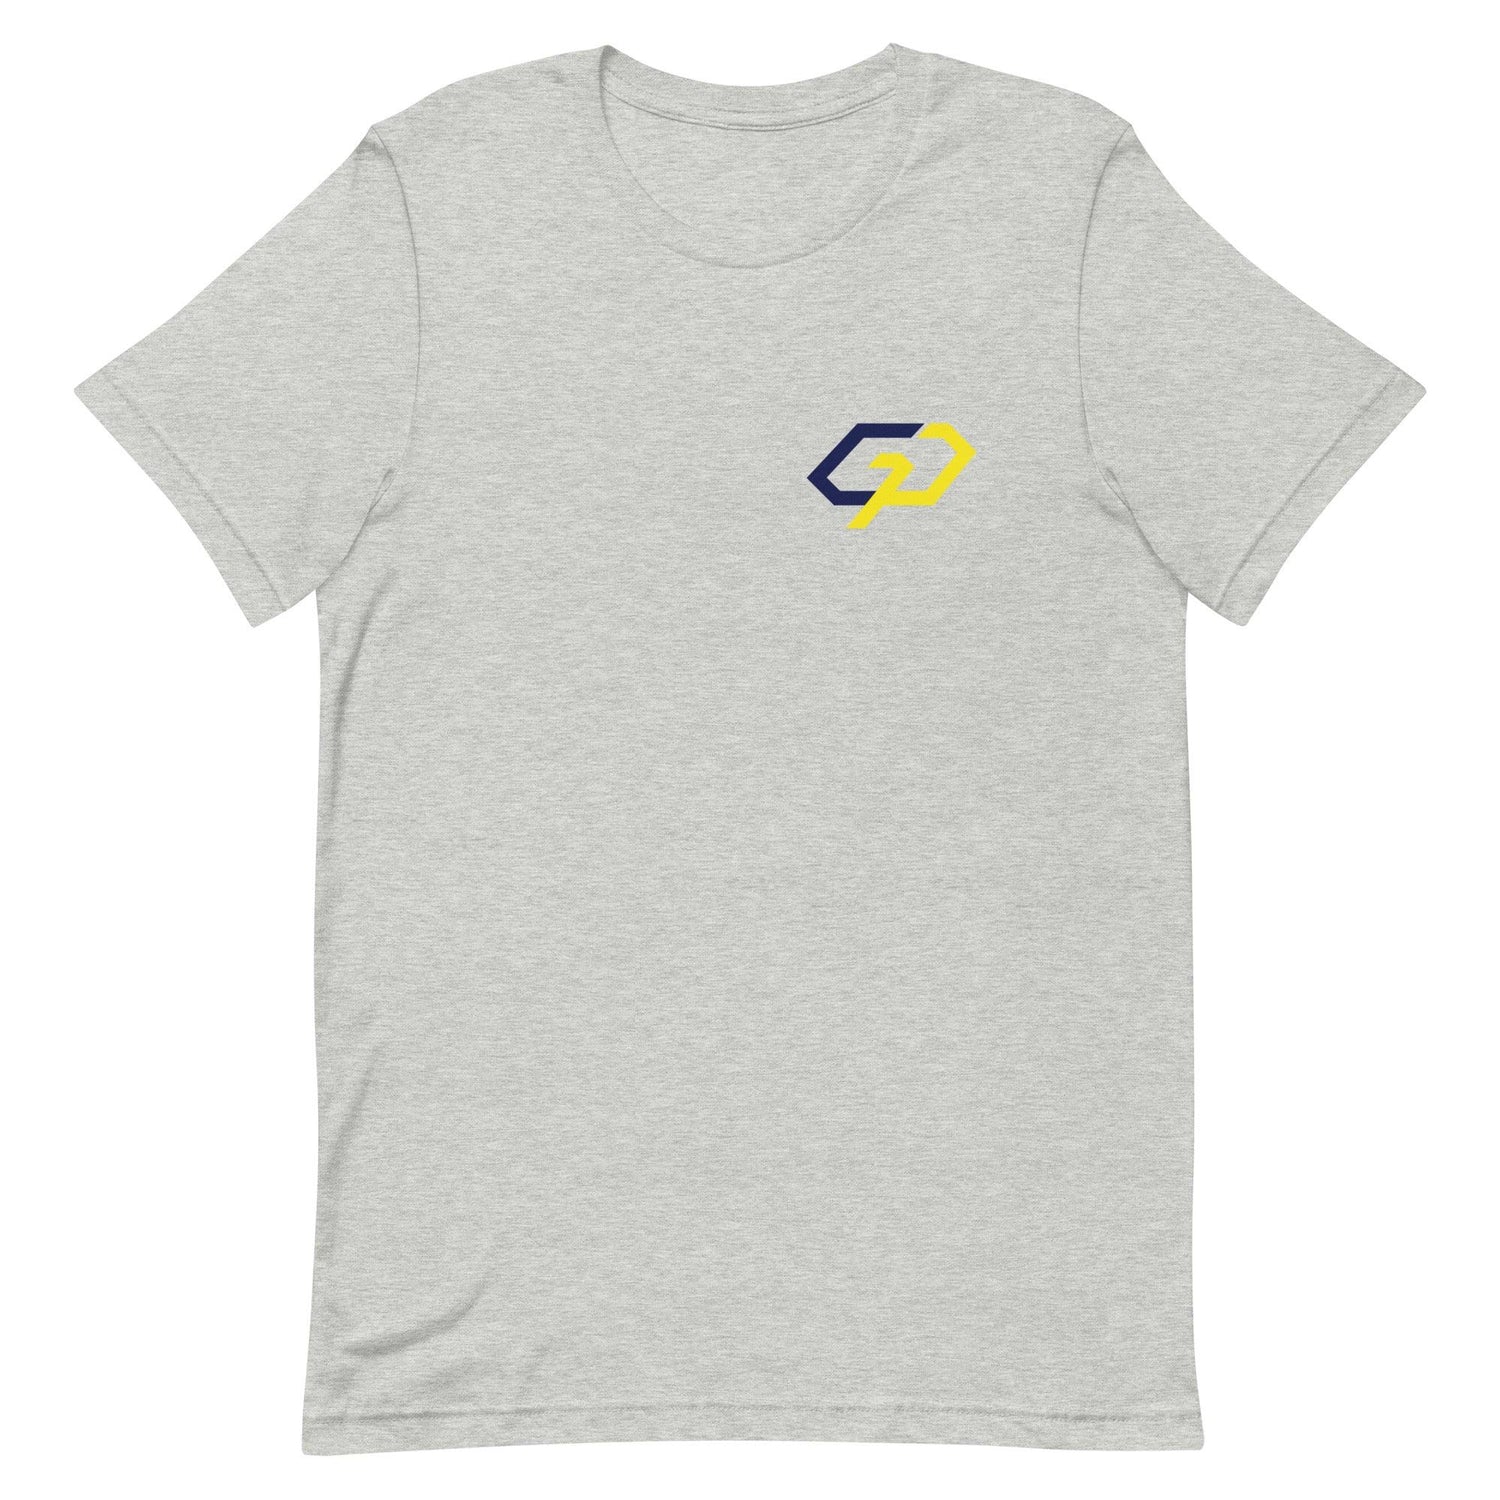 Gregory Pace "Signature" t-shirt - Fan Arch